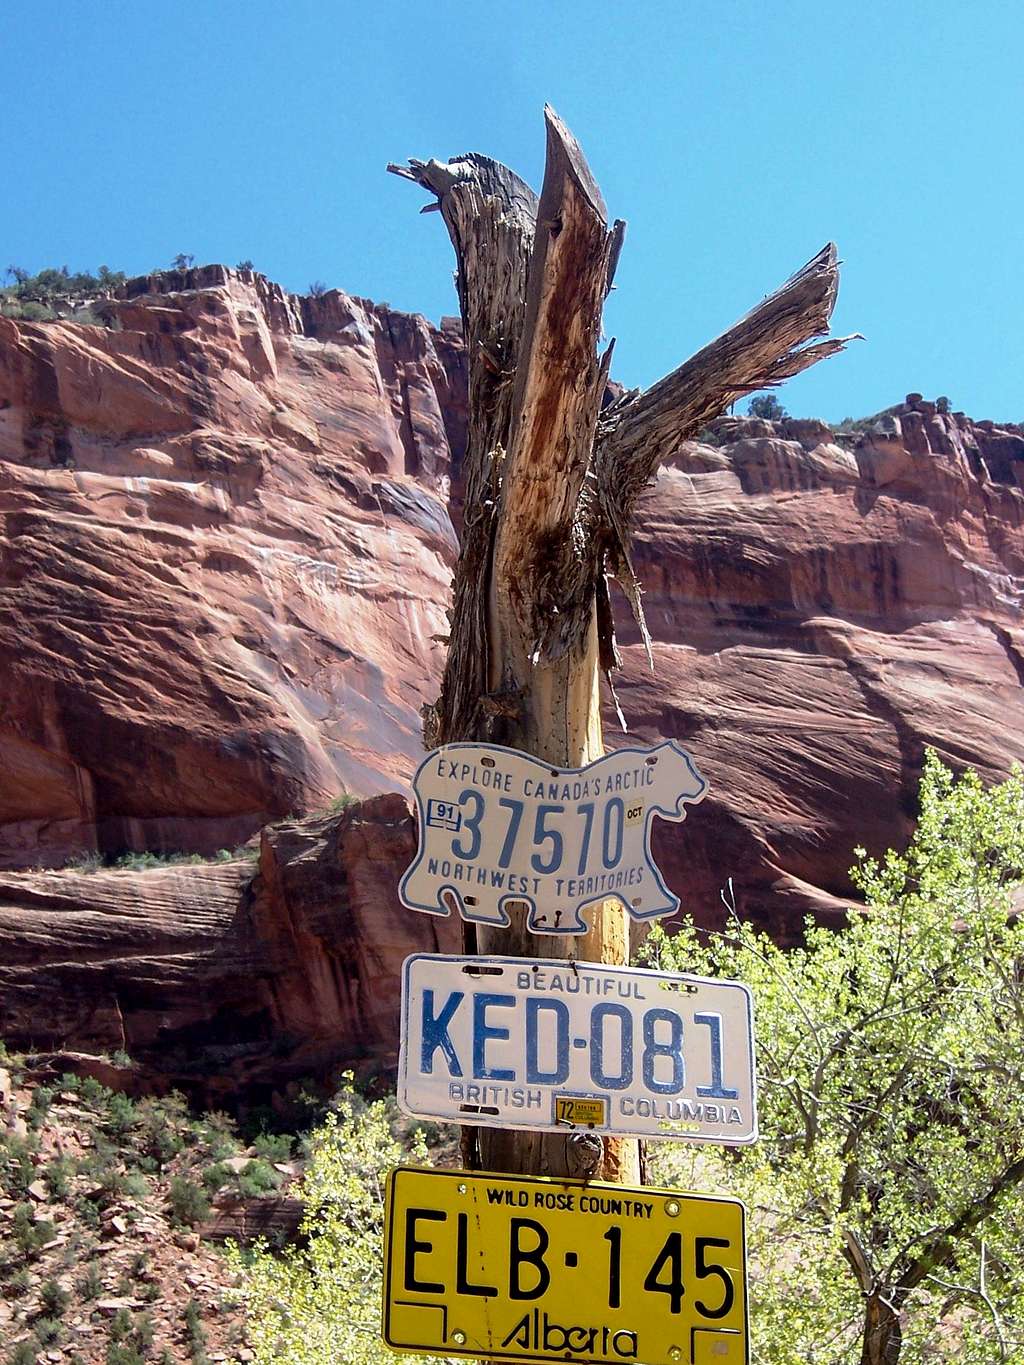 License plates on a post, Canyon de Chelly